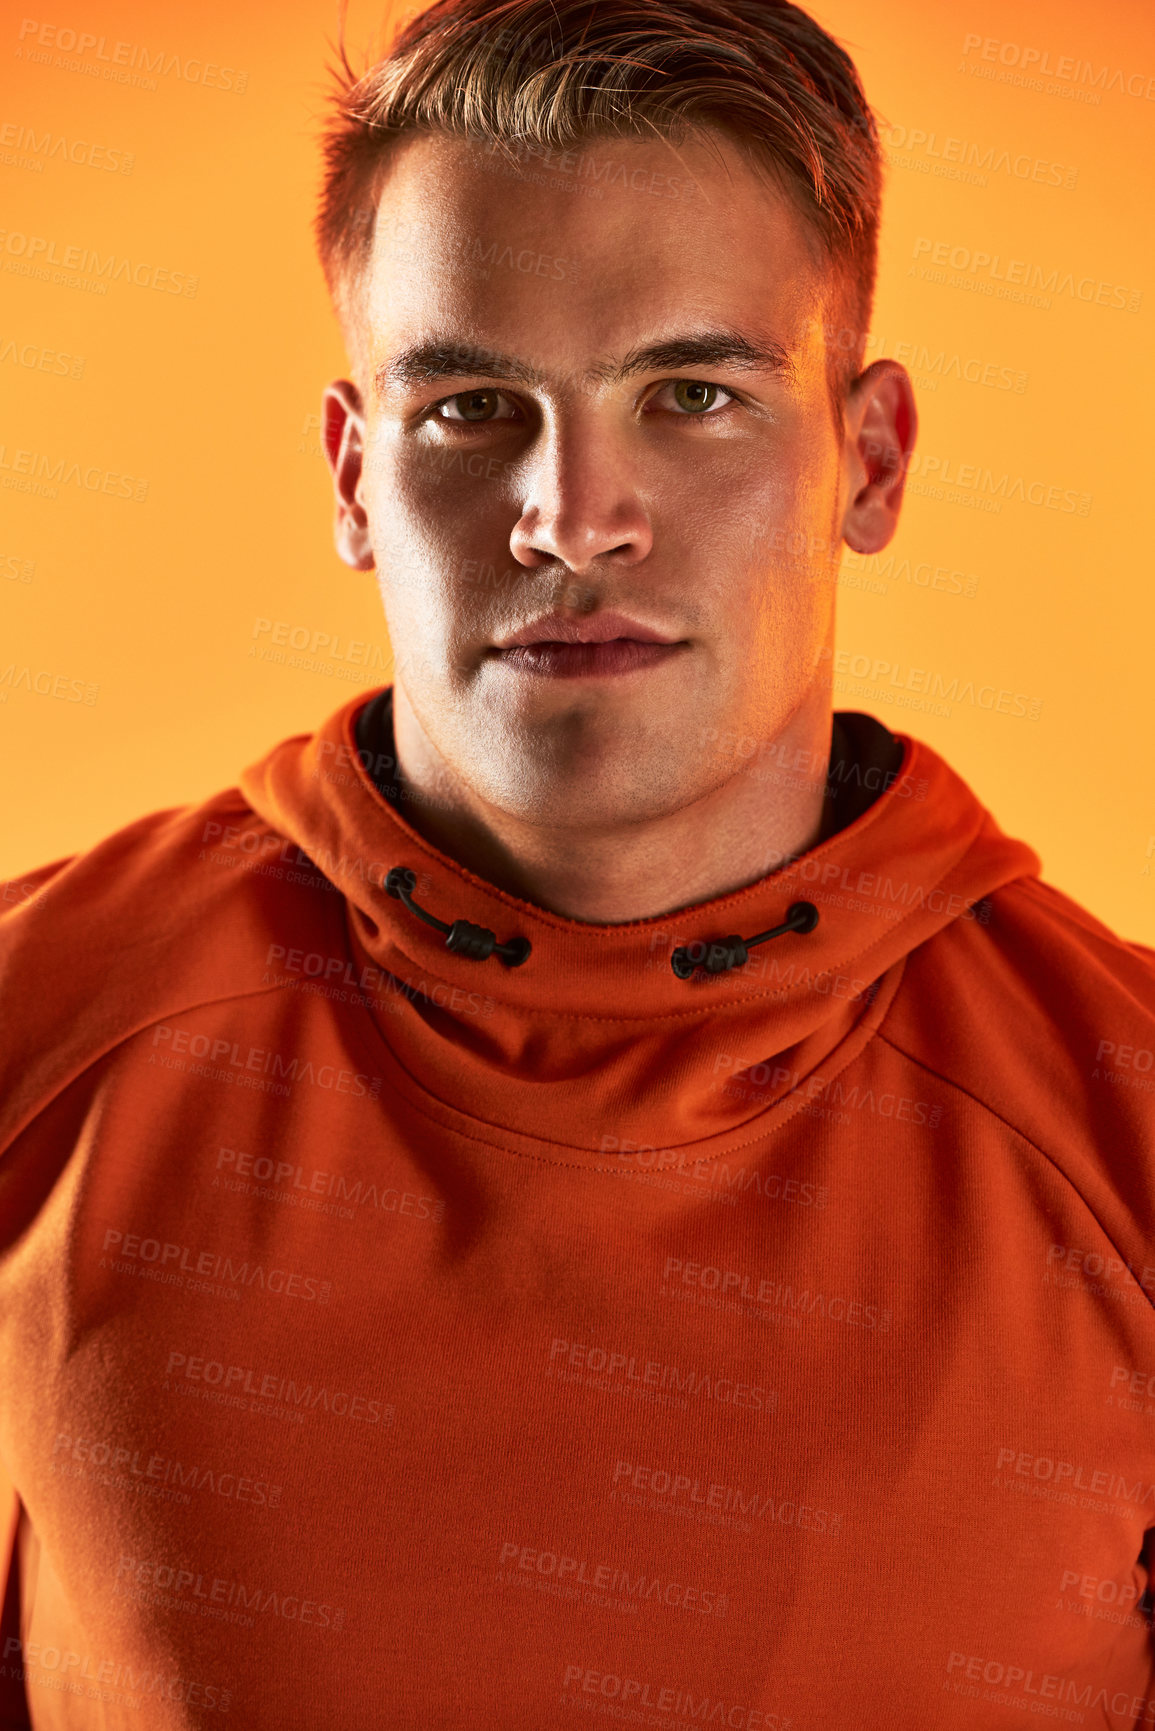 Buy stock photo Studio portrait of a handsome young male athlete posing against an orange background